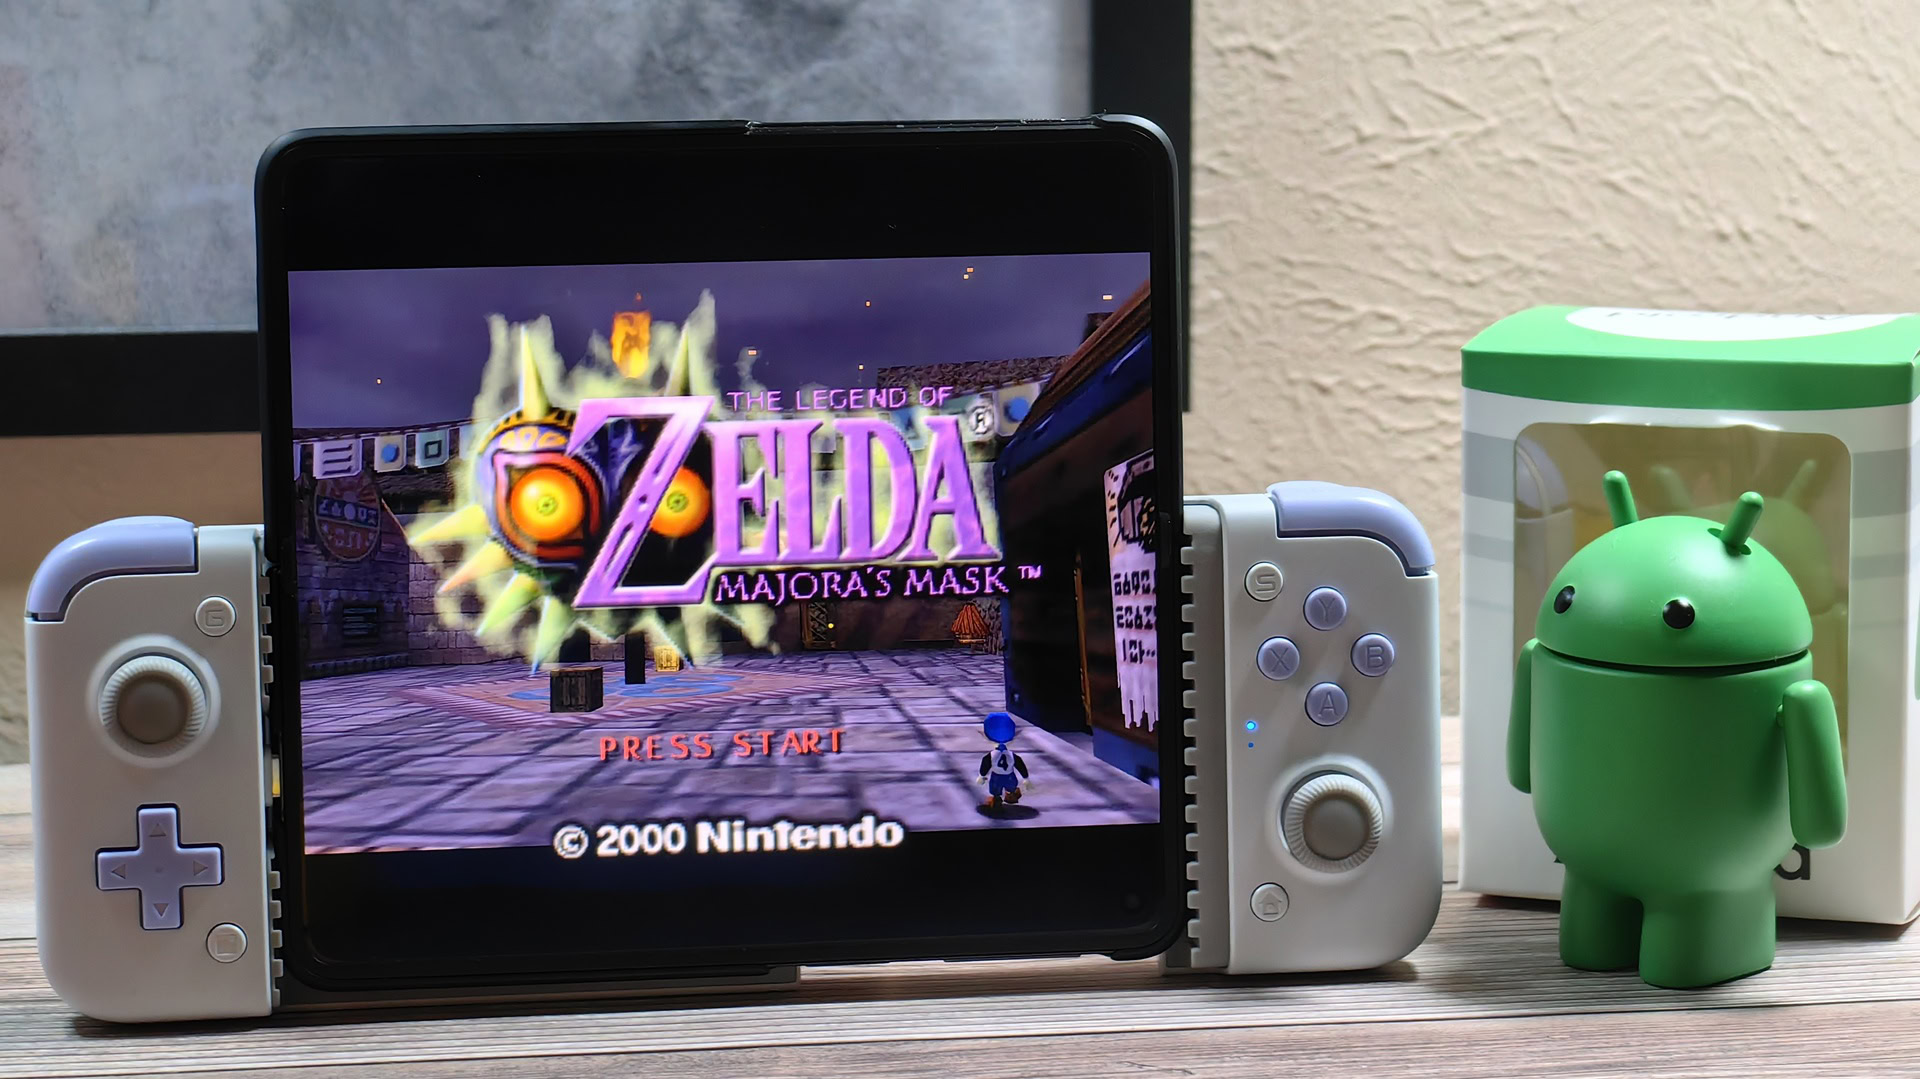 The Legend of Zelda: Majora’s Mask can now natively run on Android thanks to an unofficial port